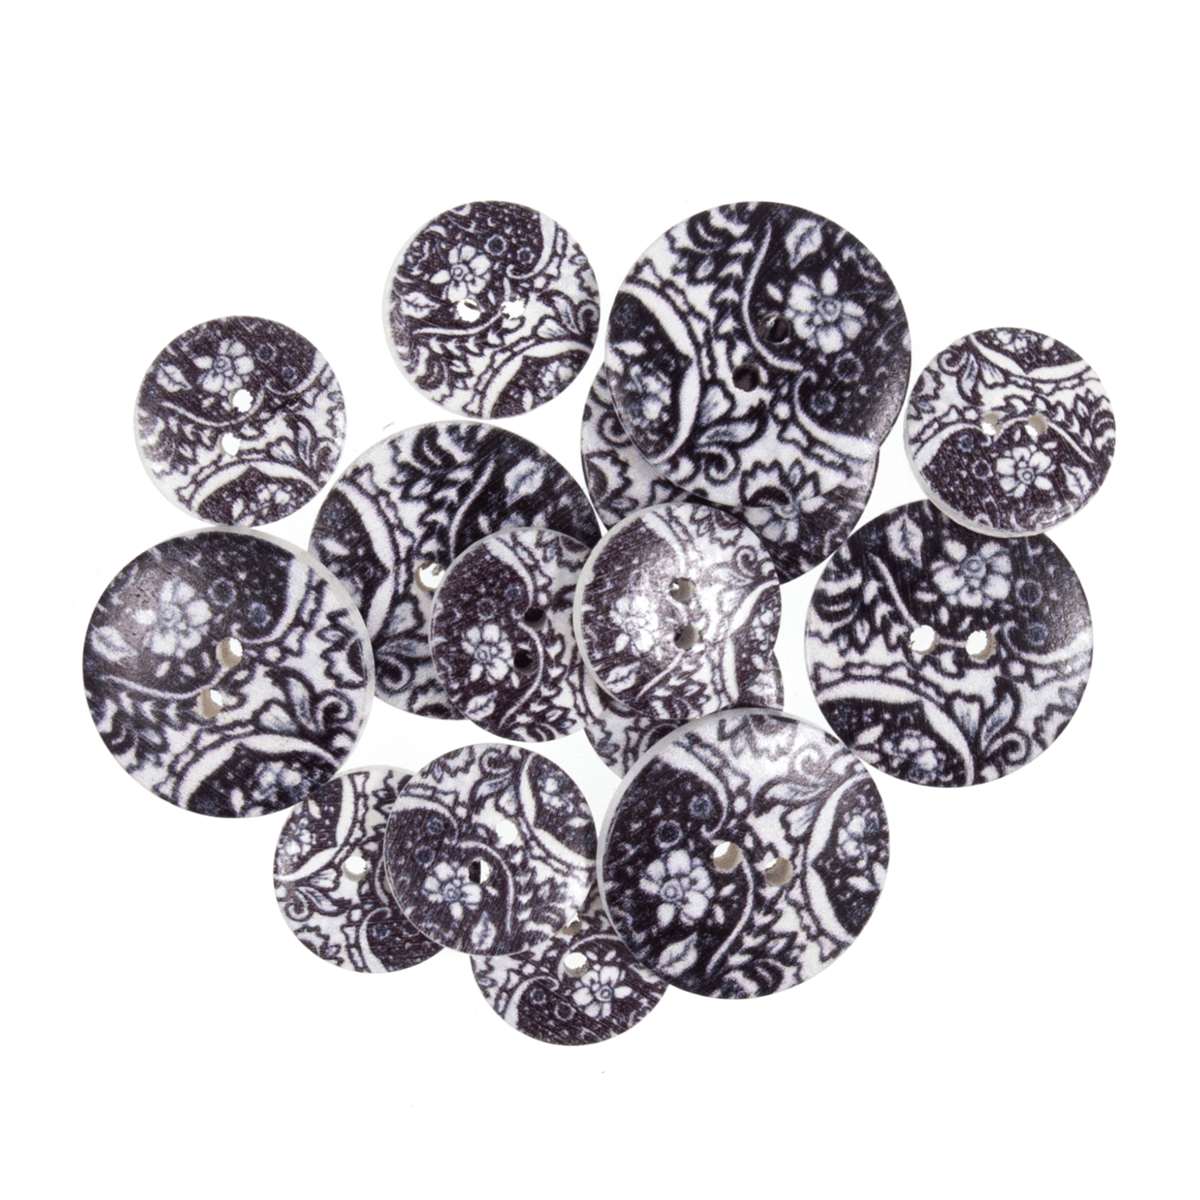 15 x Assorted Negative Paisley Toile Craft Buttons 18mm - 25mm 